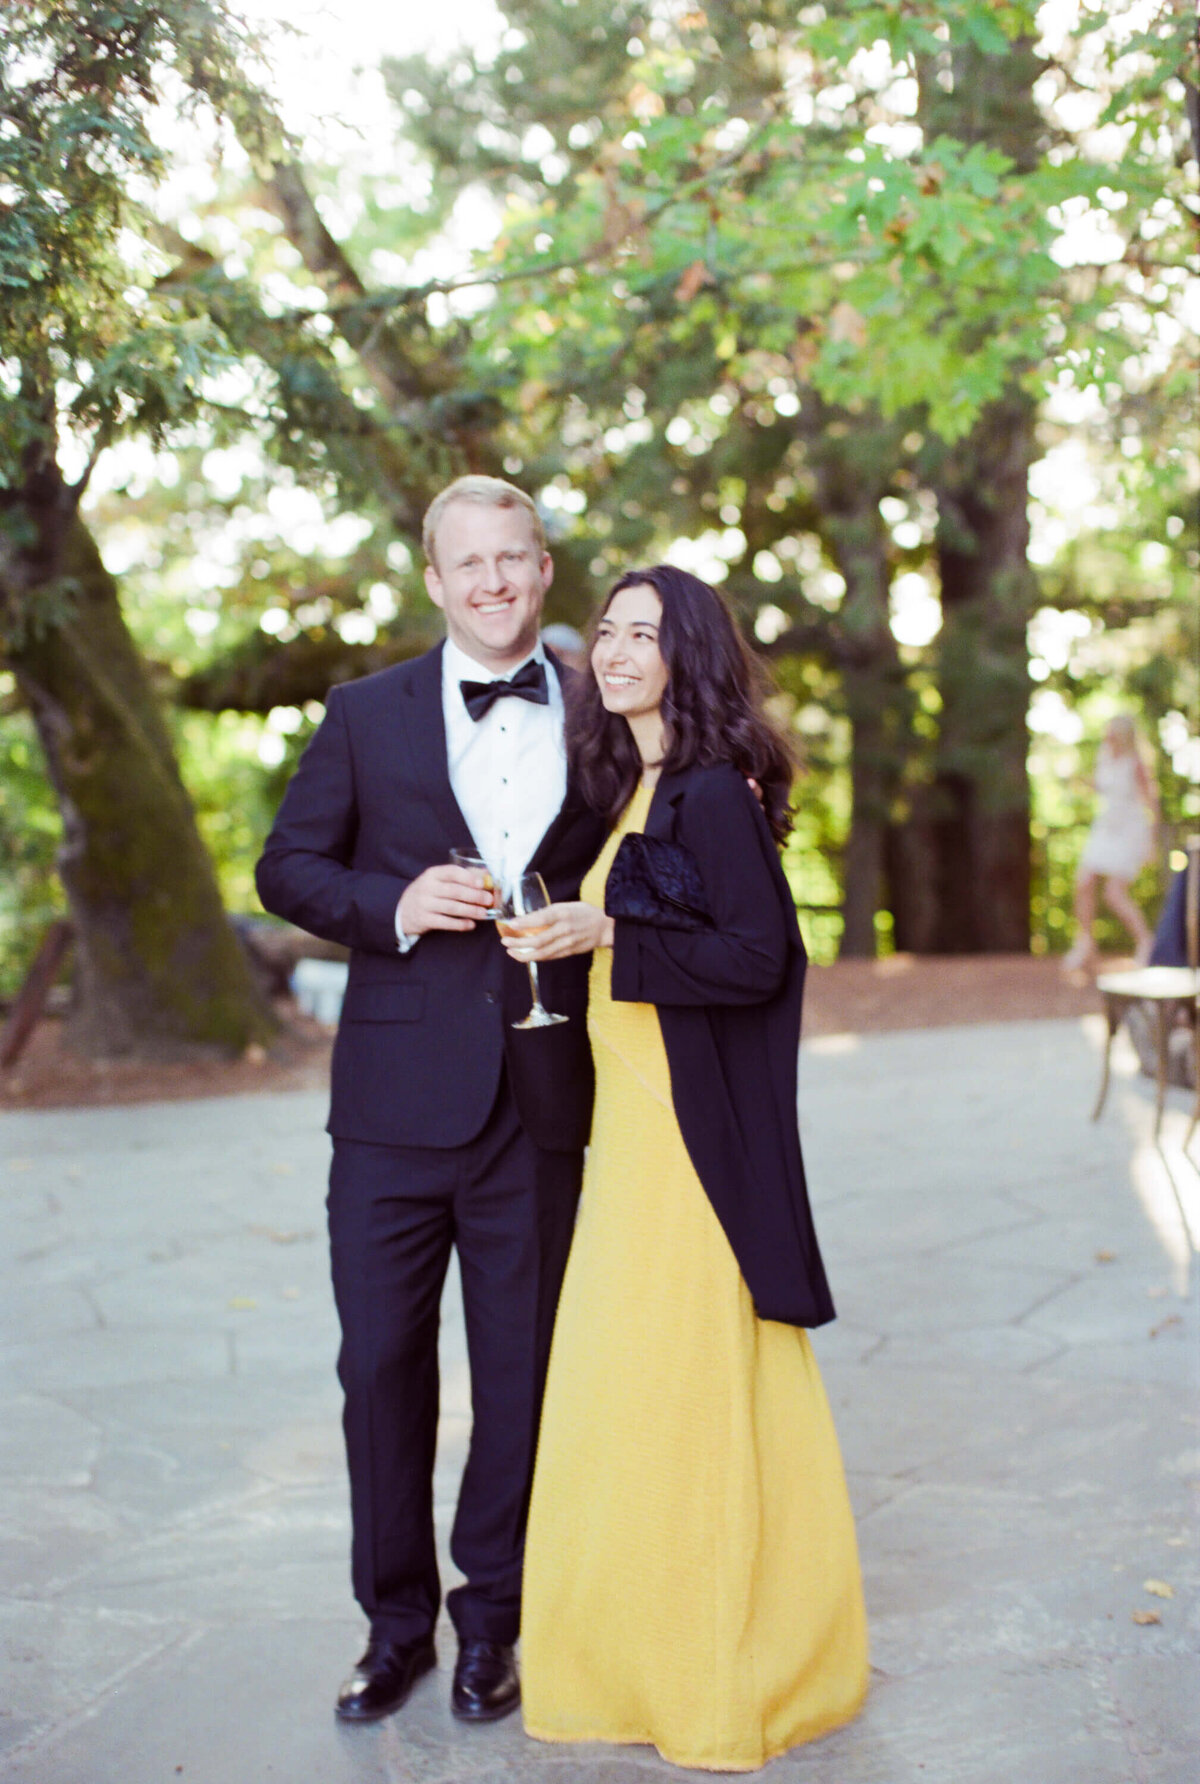 Man in black suit and bow tie with a lady in lemon empire waist gown pose with champagne at a vineyard wedding venue.